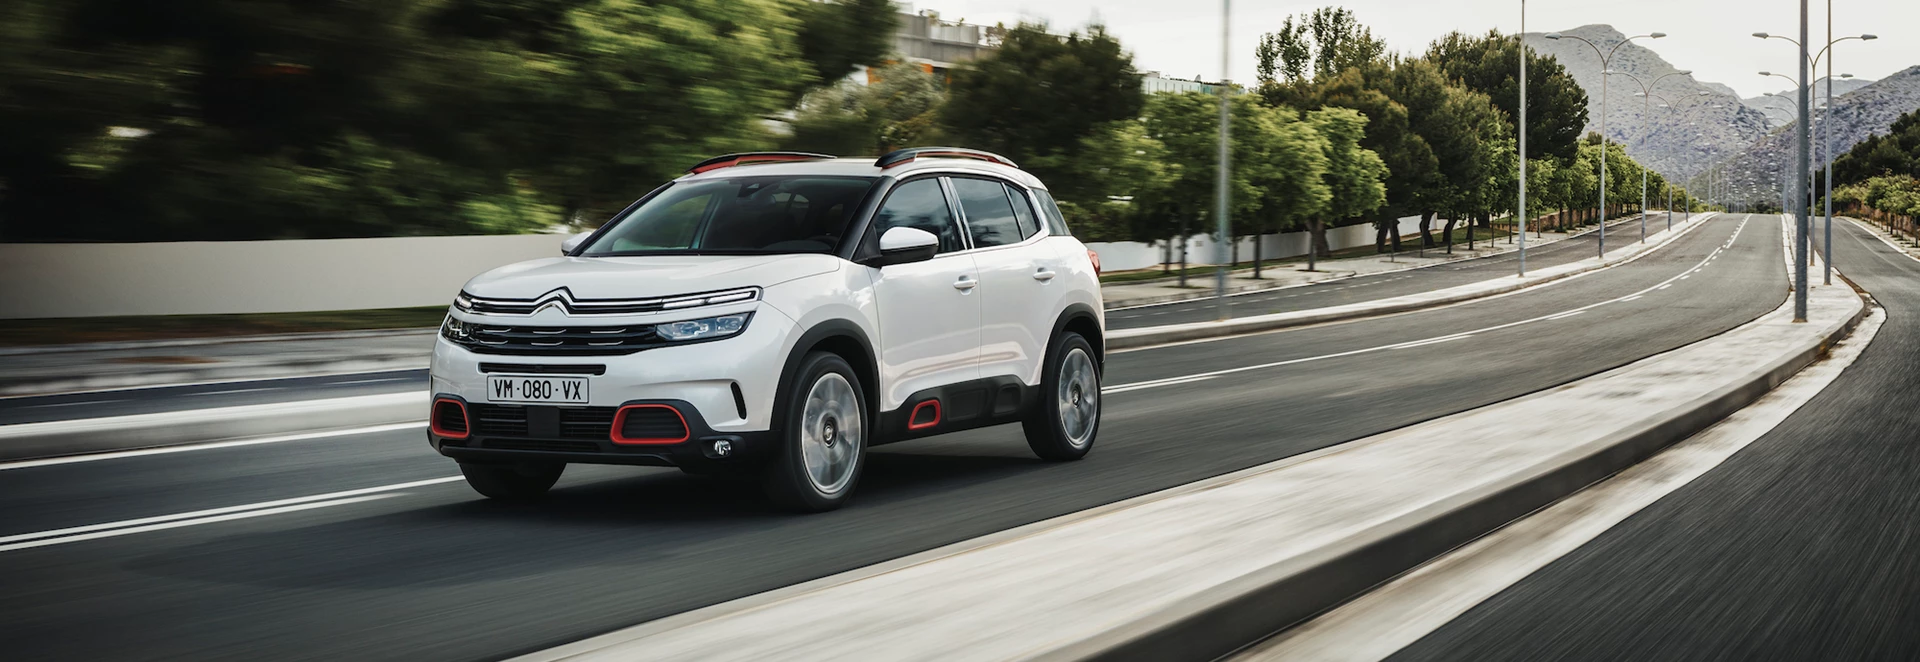 The best features on the 2019 Citroen C5 Aircross